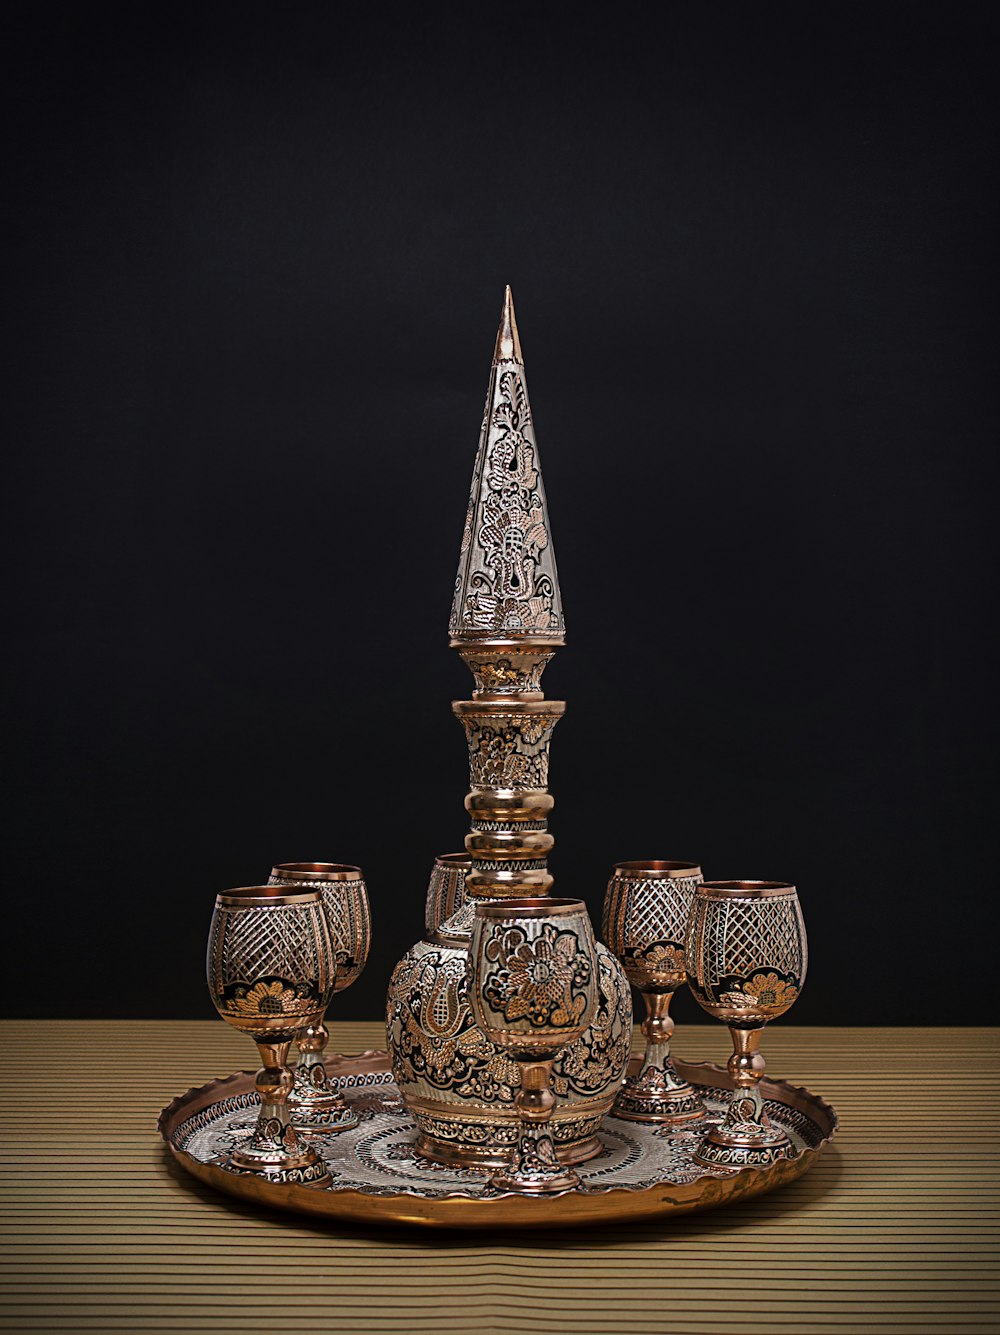 a silver candle holder and four goblets on a wooden table